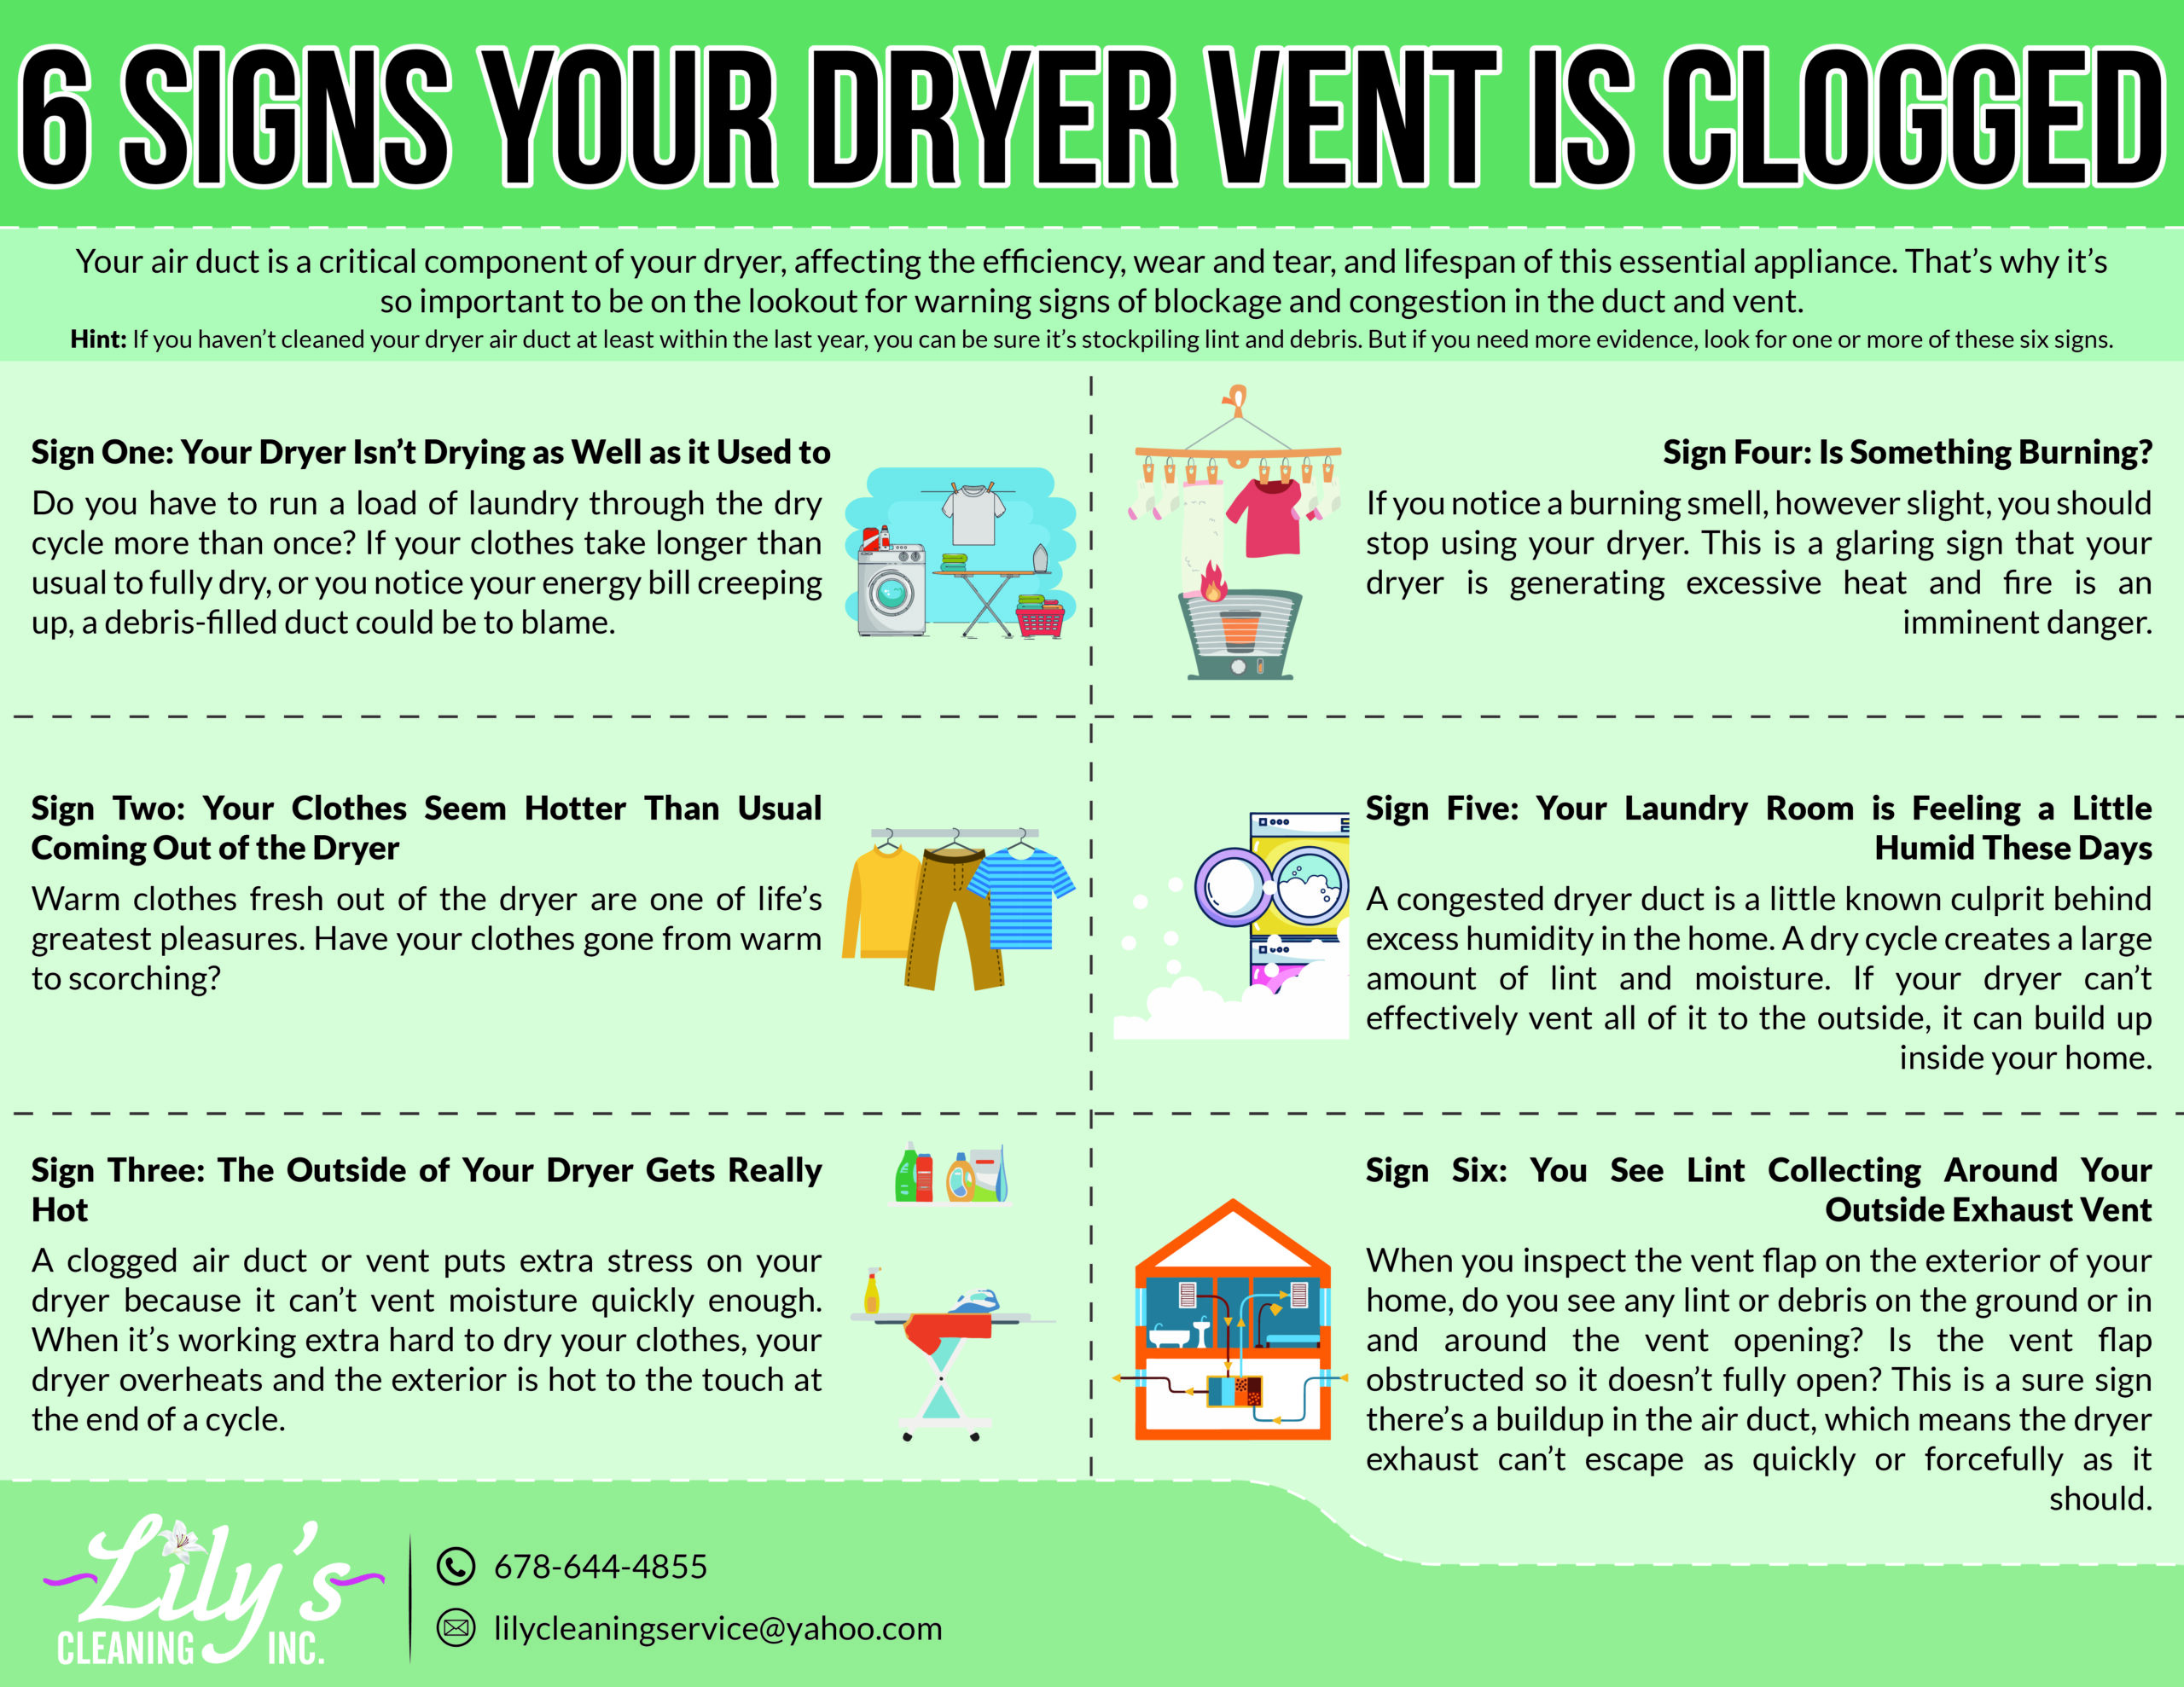 lilys-cleaning-6-signs-your-dryer-vent-is-clogged-infographoc